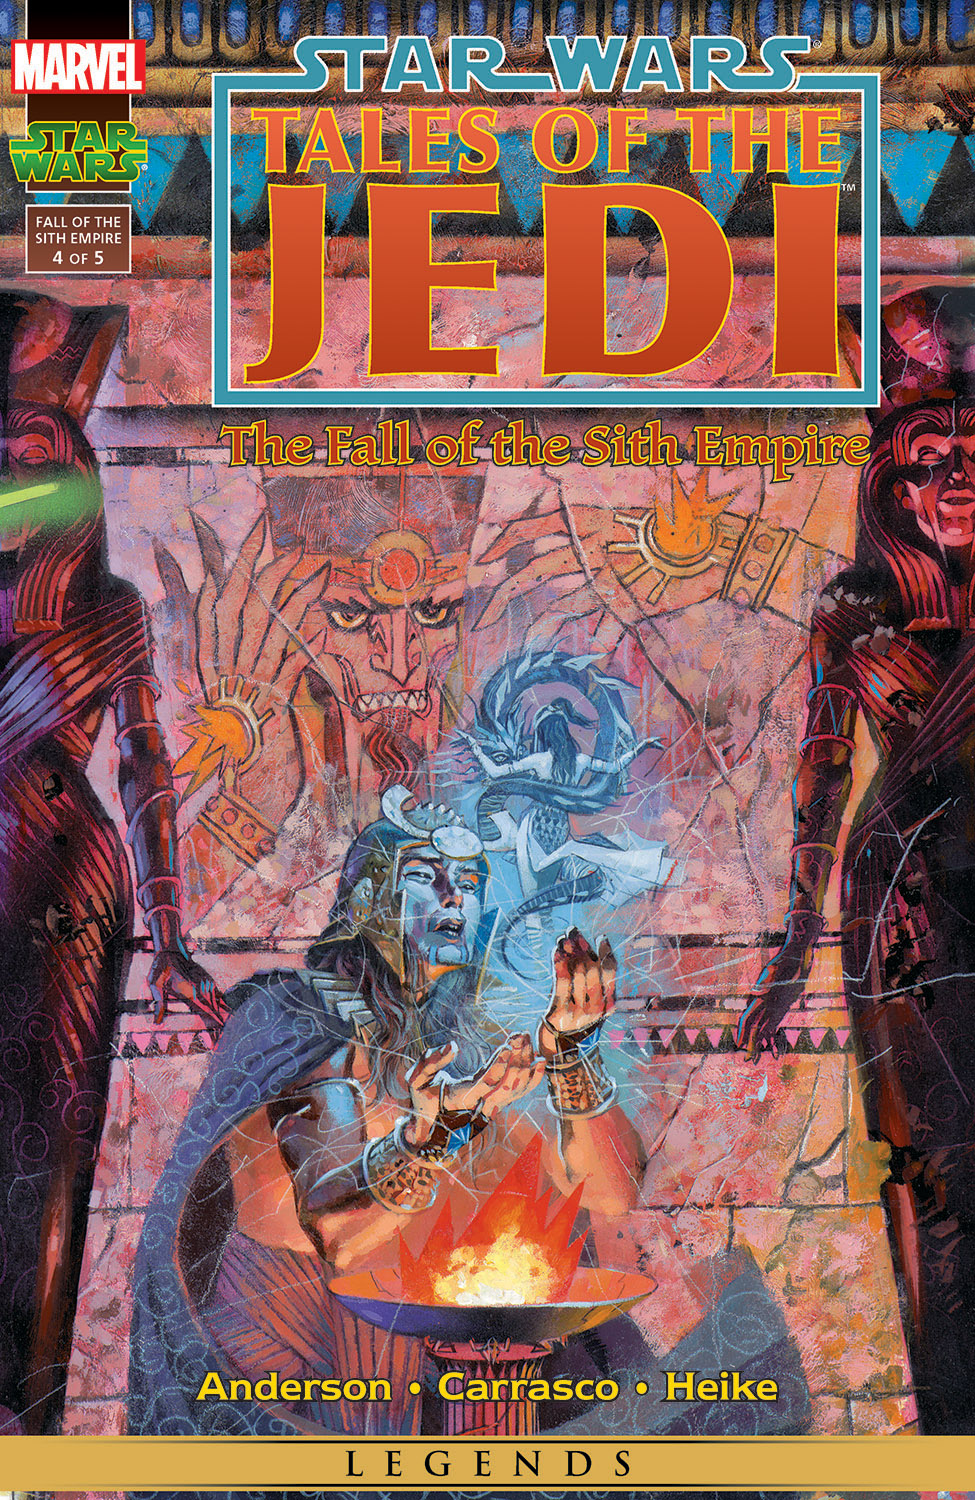 Star Wars: Tales of the Jedi - The Fall of the Sith Empire (1997) #4